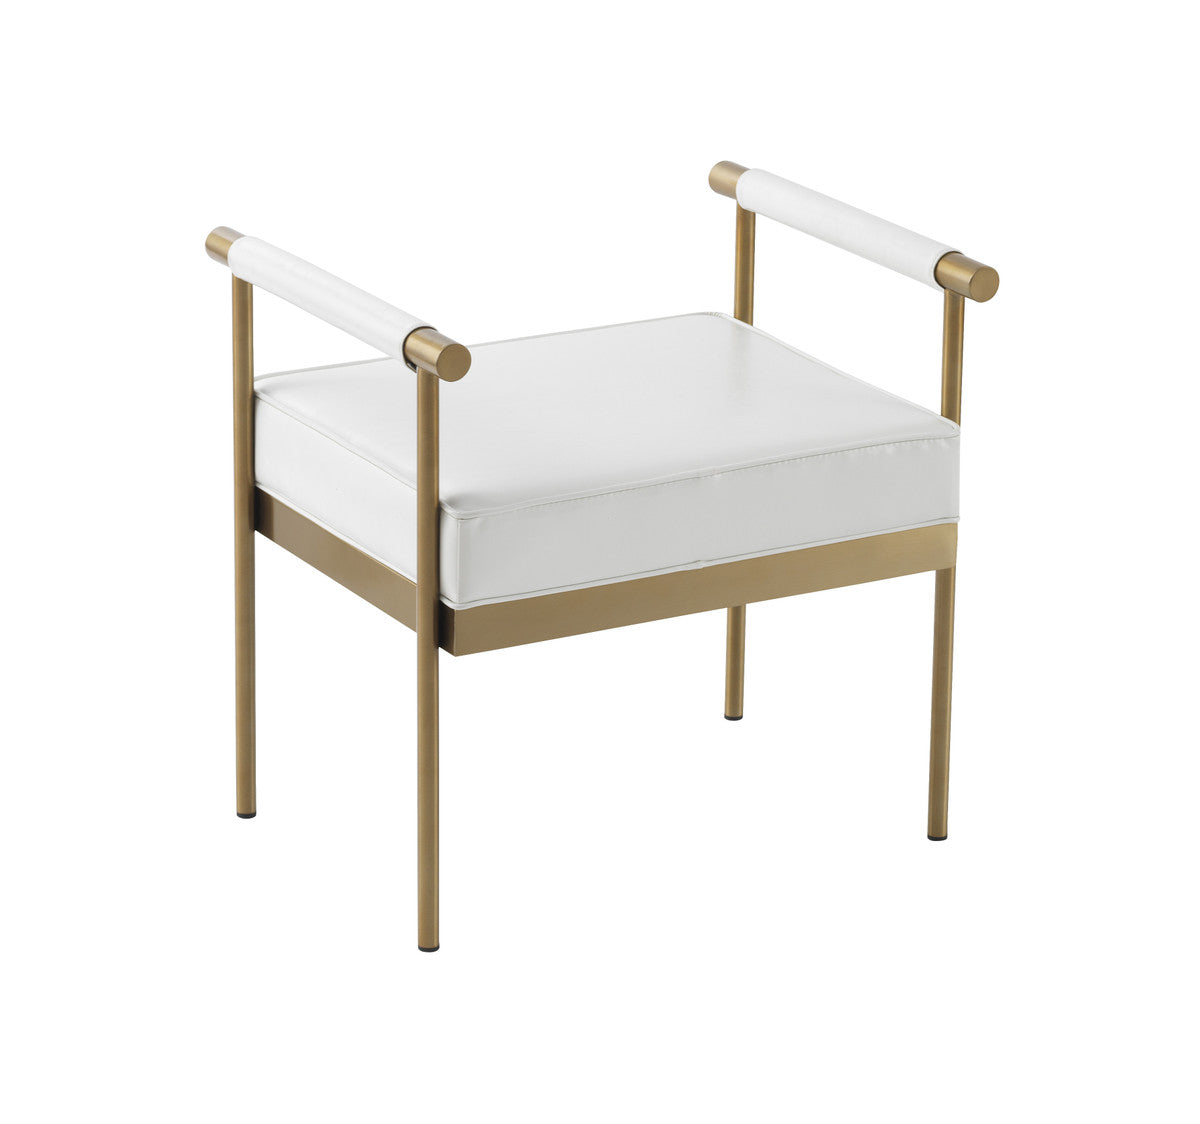 Malakeh White Vegan Leather Bench - Luxury Living Collection